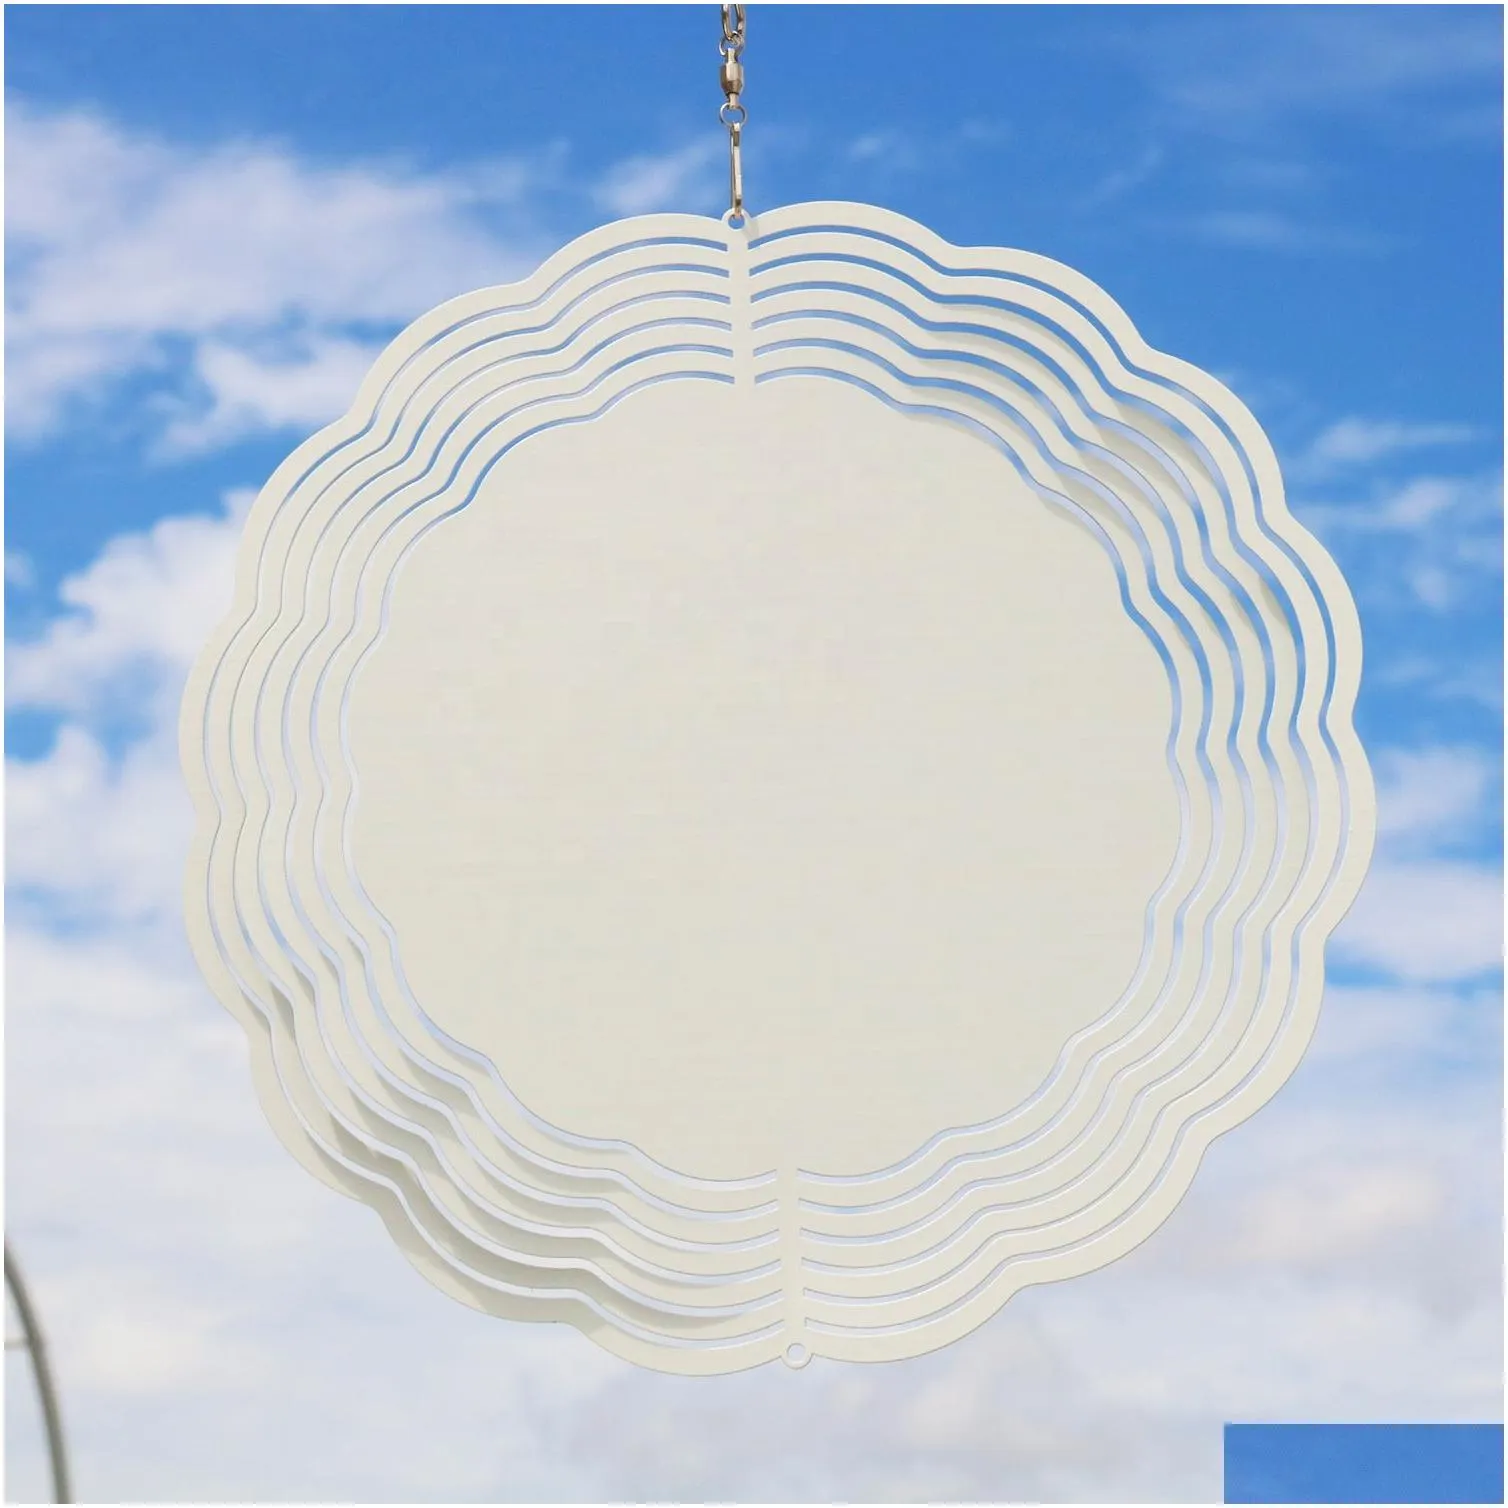 Sublimation Blanks Wholesale Sublimation Blank Wind Spinner 10 Inch Aluminum Spinners Outdoor Hanging Garden Decoration Metal Blanks F Dhizd